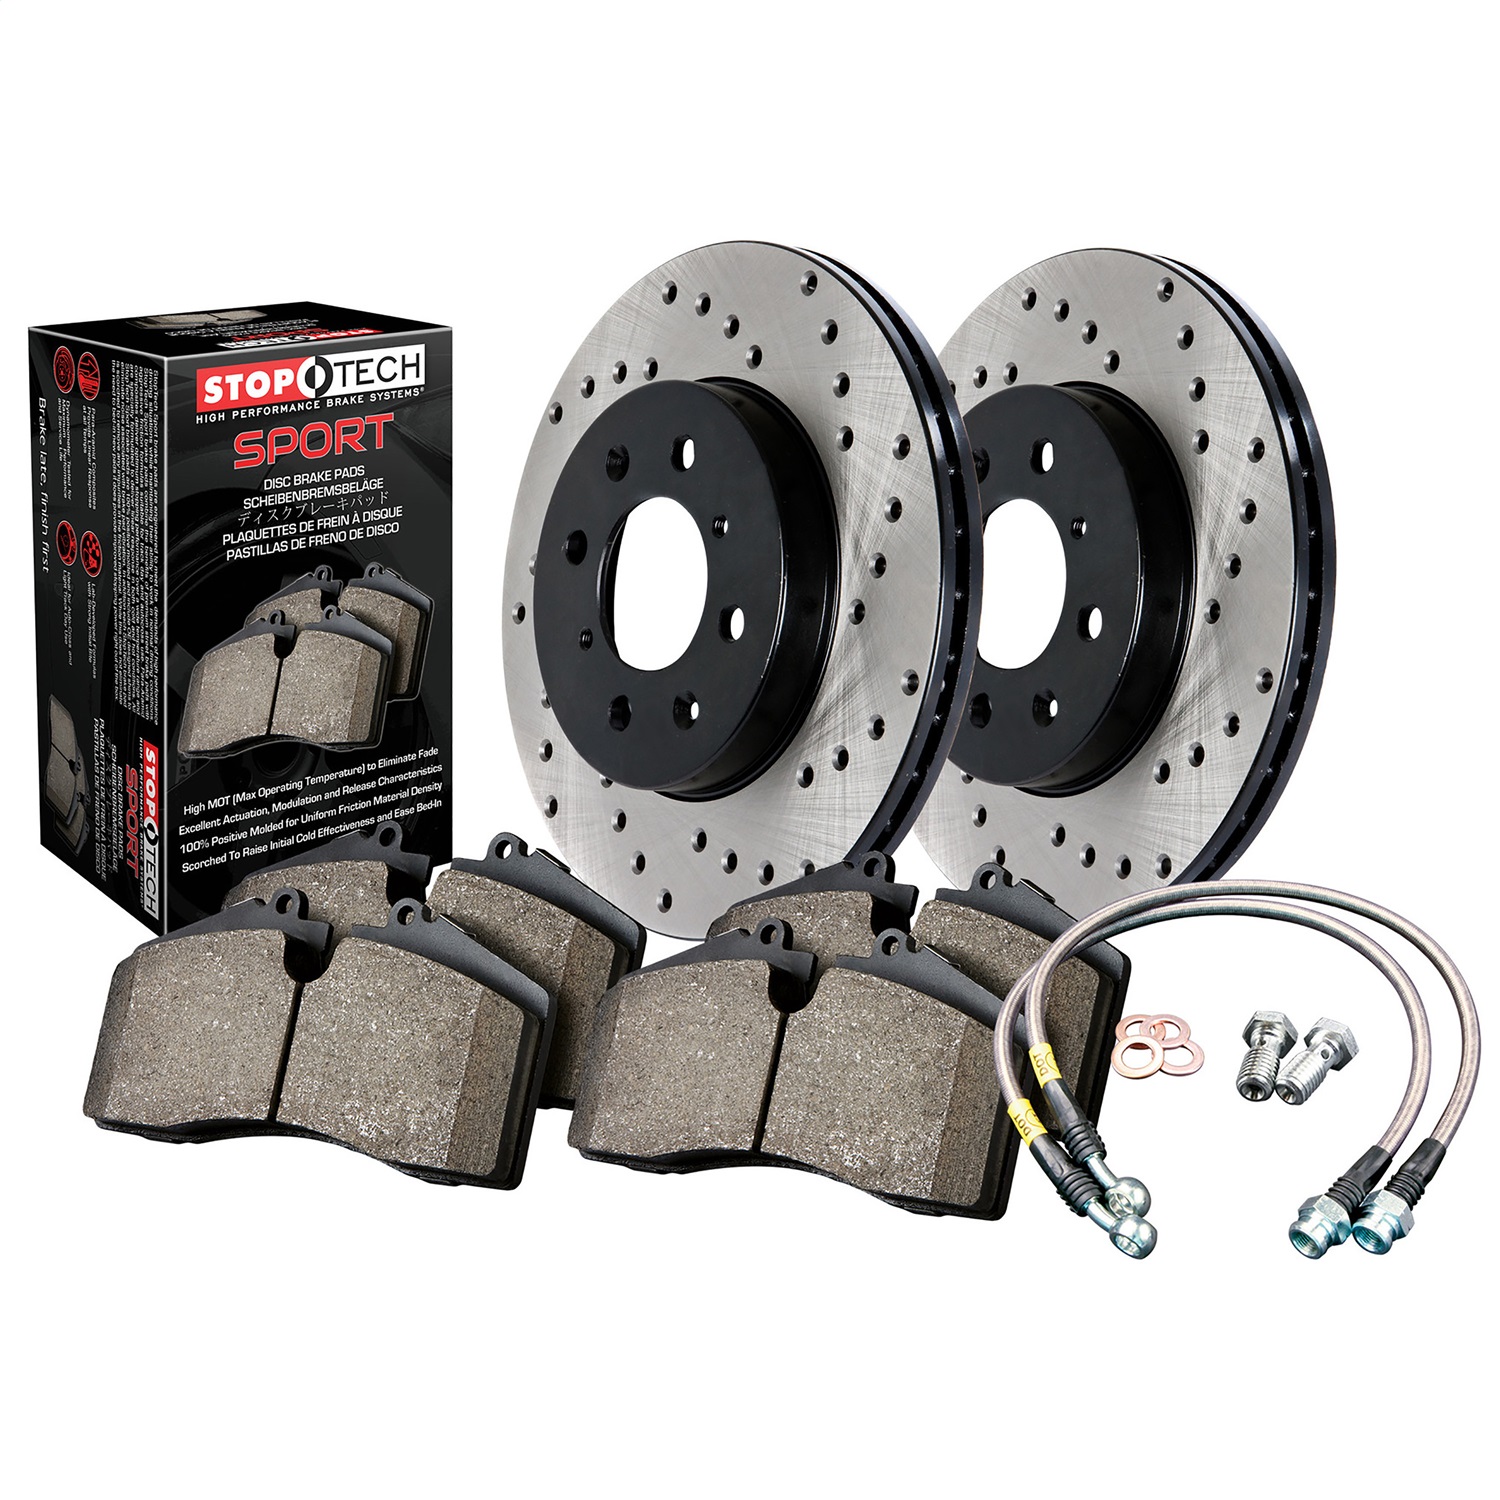 StopTech 979.34004R Sport Disc Brake Kit w/Cross-Drilled Rotors Fits 01-06 M3